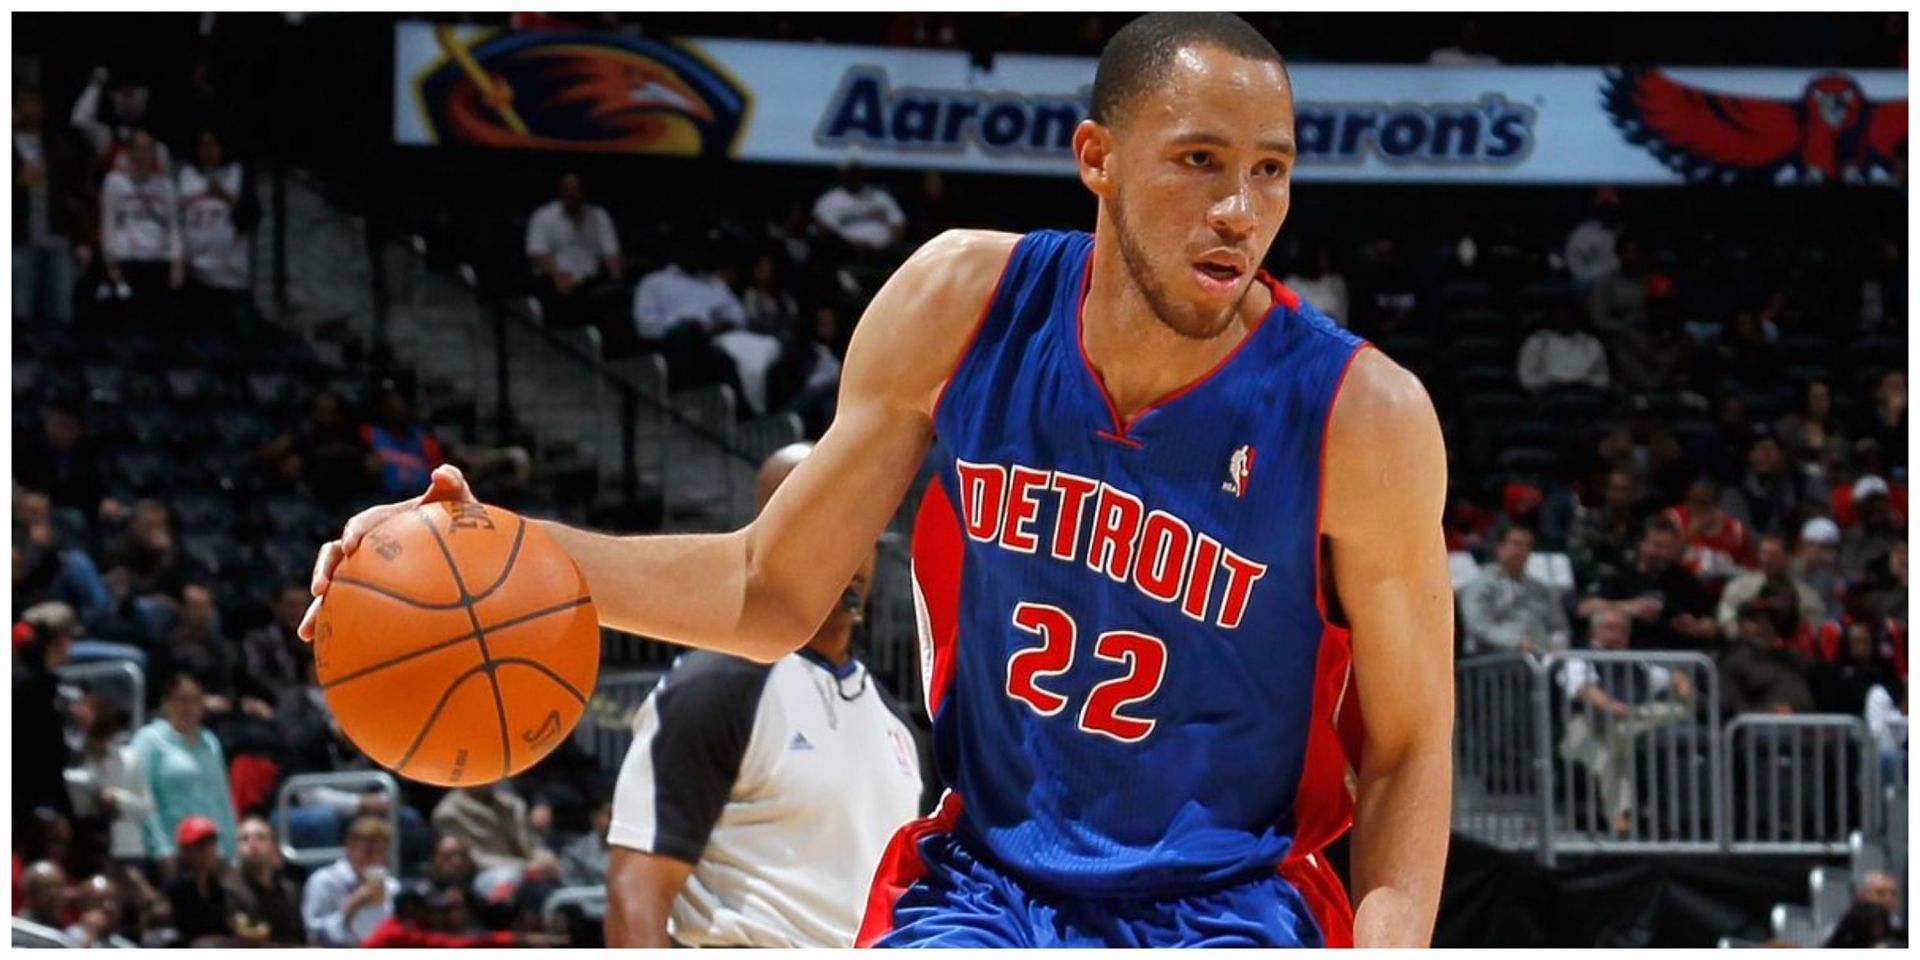 Tayshaun Prince won the 2004 title with the Pistons